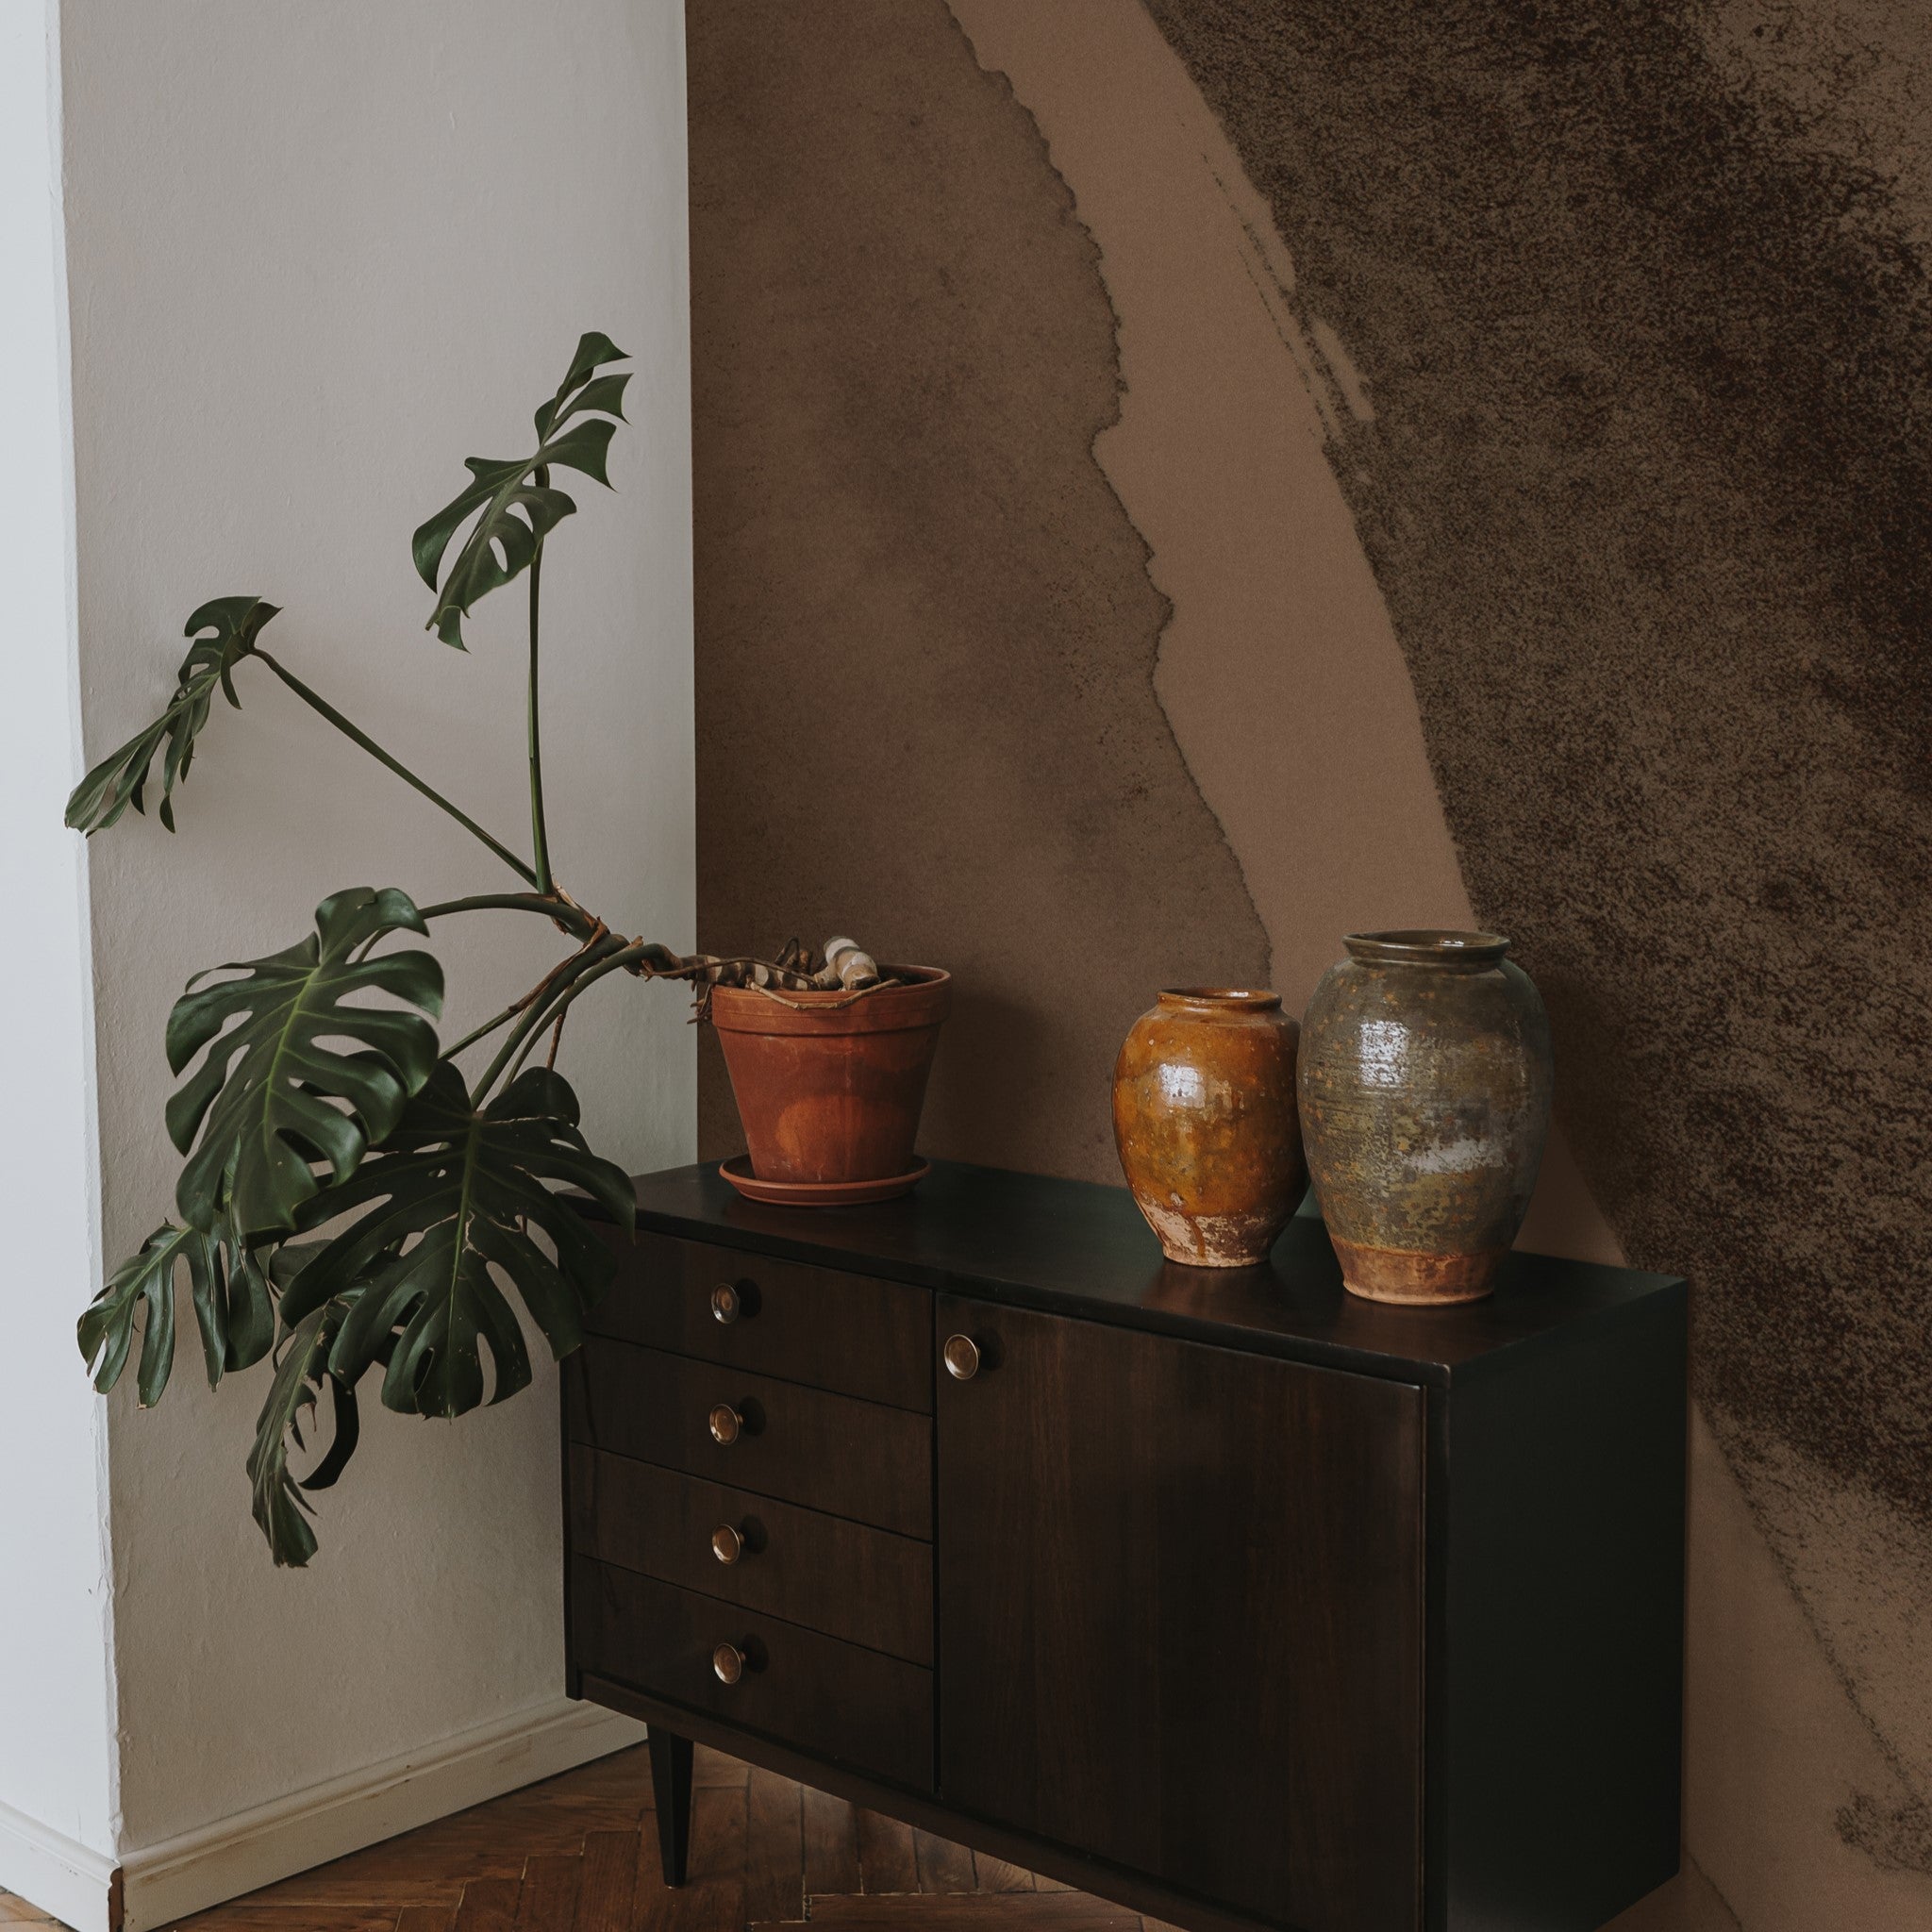 "Wall Blush's Chicago Wallpaper accentuating a modern living room decor with a sideboard and houseplants."